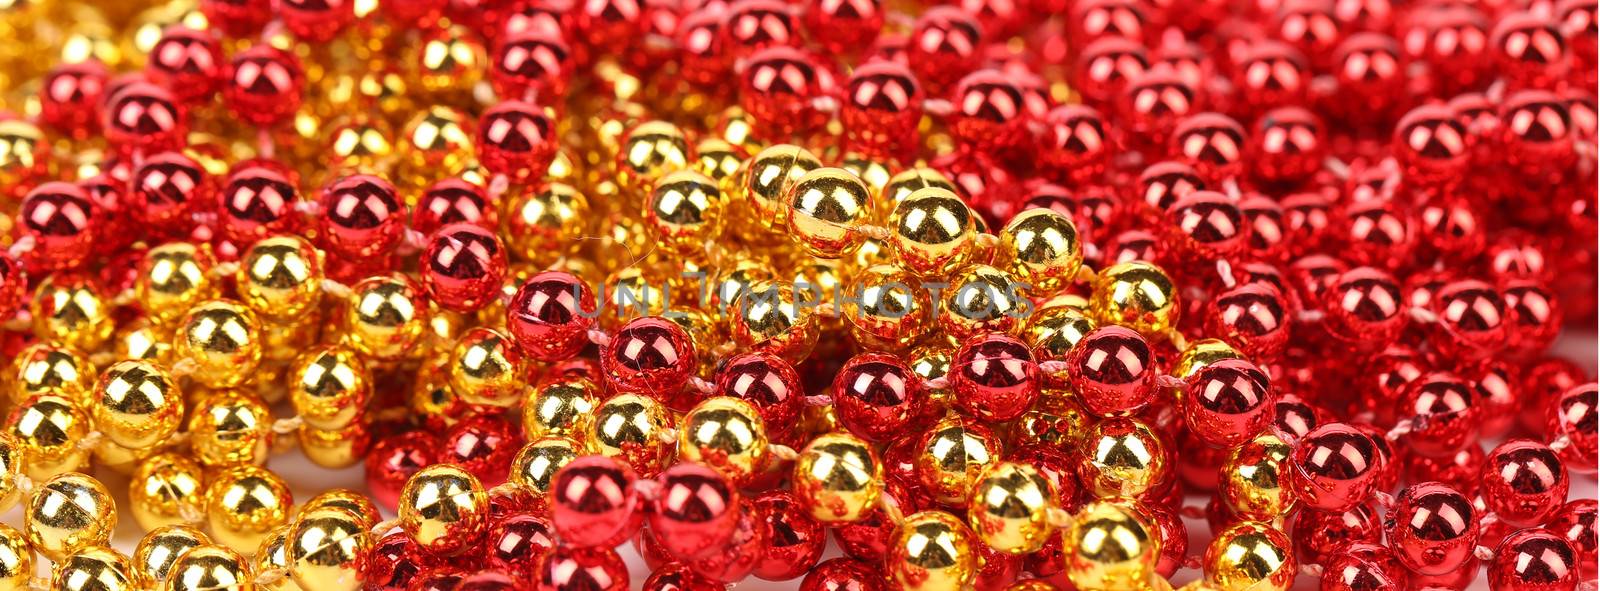 Closeup of gold and red beads. by indigolotos